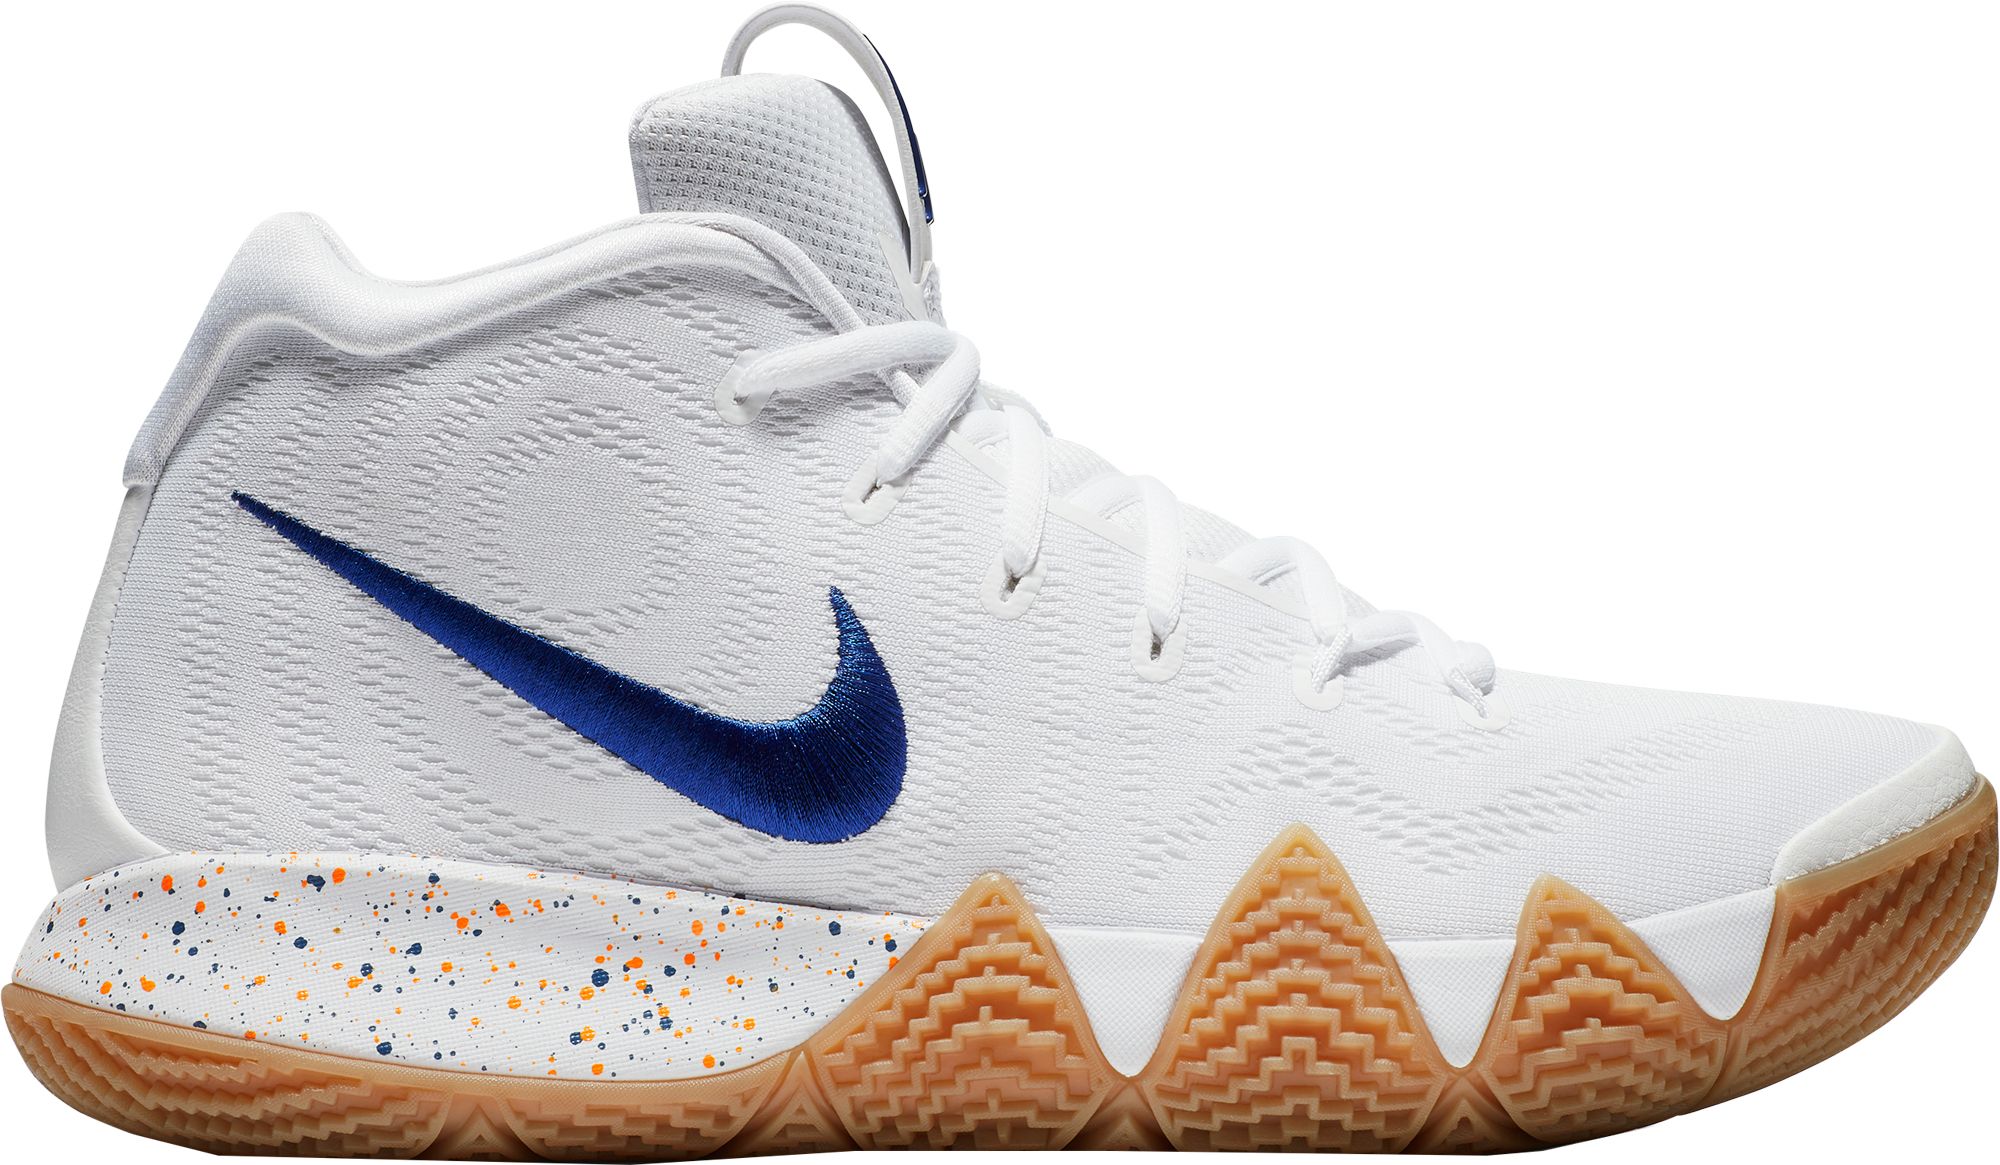 Nike Men's Kyrie 4 'Uncle Drew' Basketball Shoes | Best Price Guarantee at  DICK'S